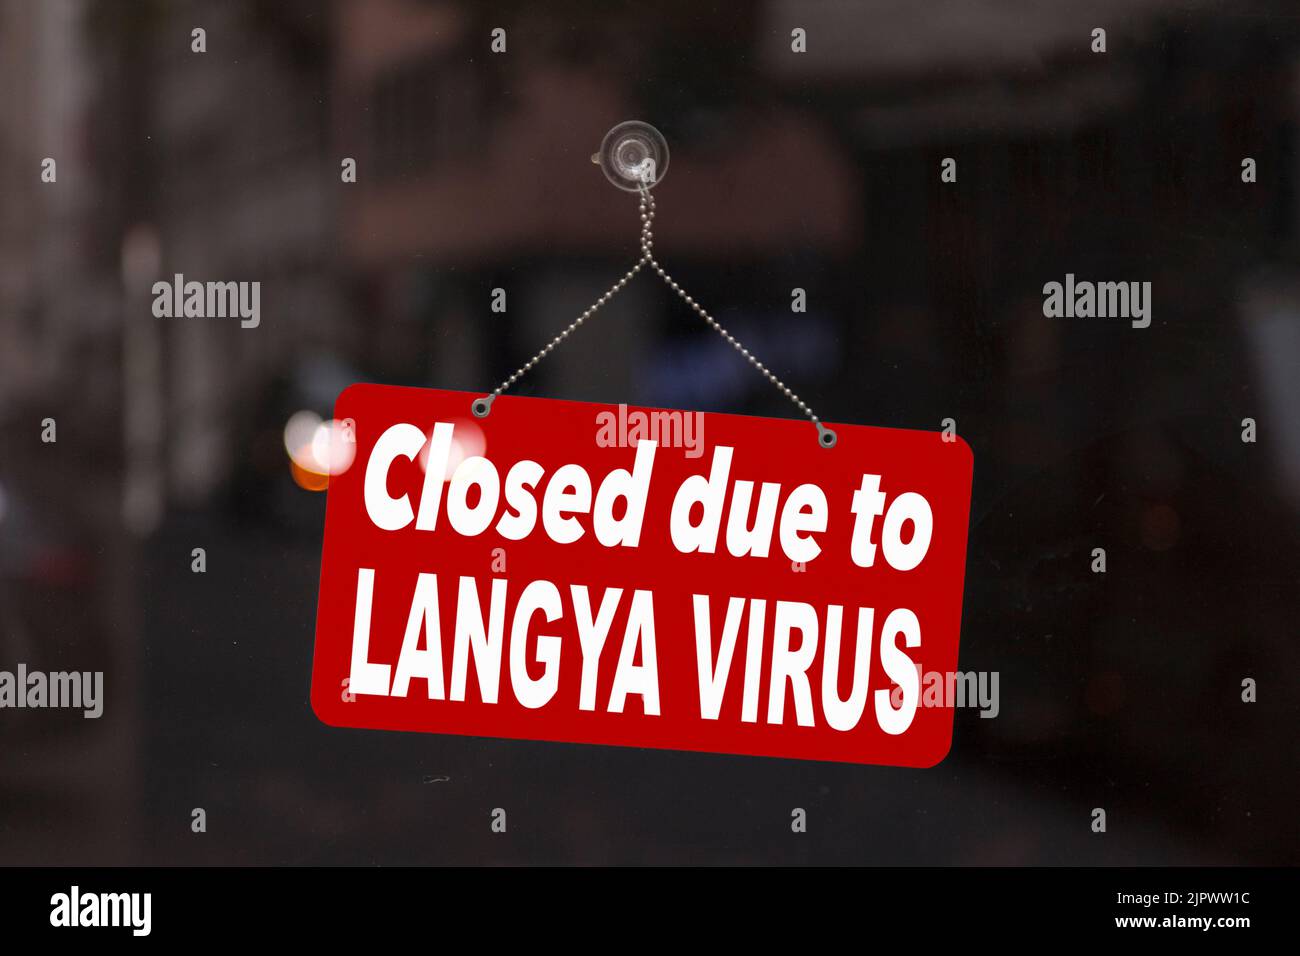 Close-up on a red sign in the window of a shop displaying the message in English - Closed due to Langya virus -. Stock Photo